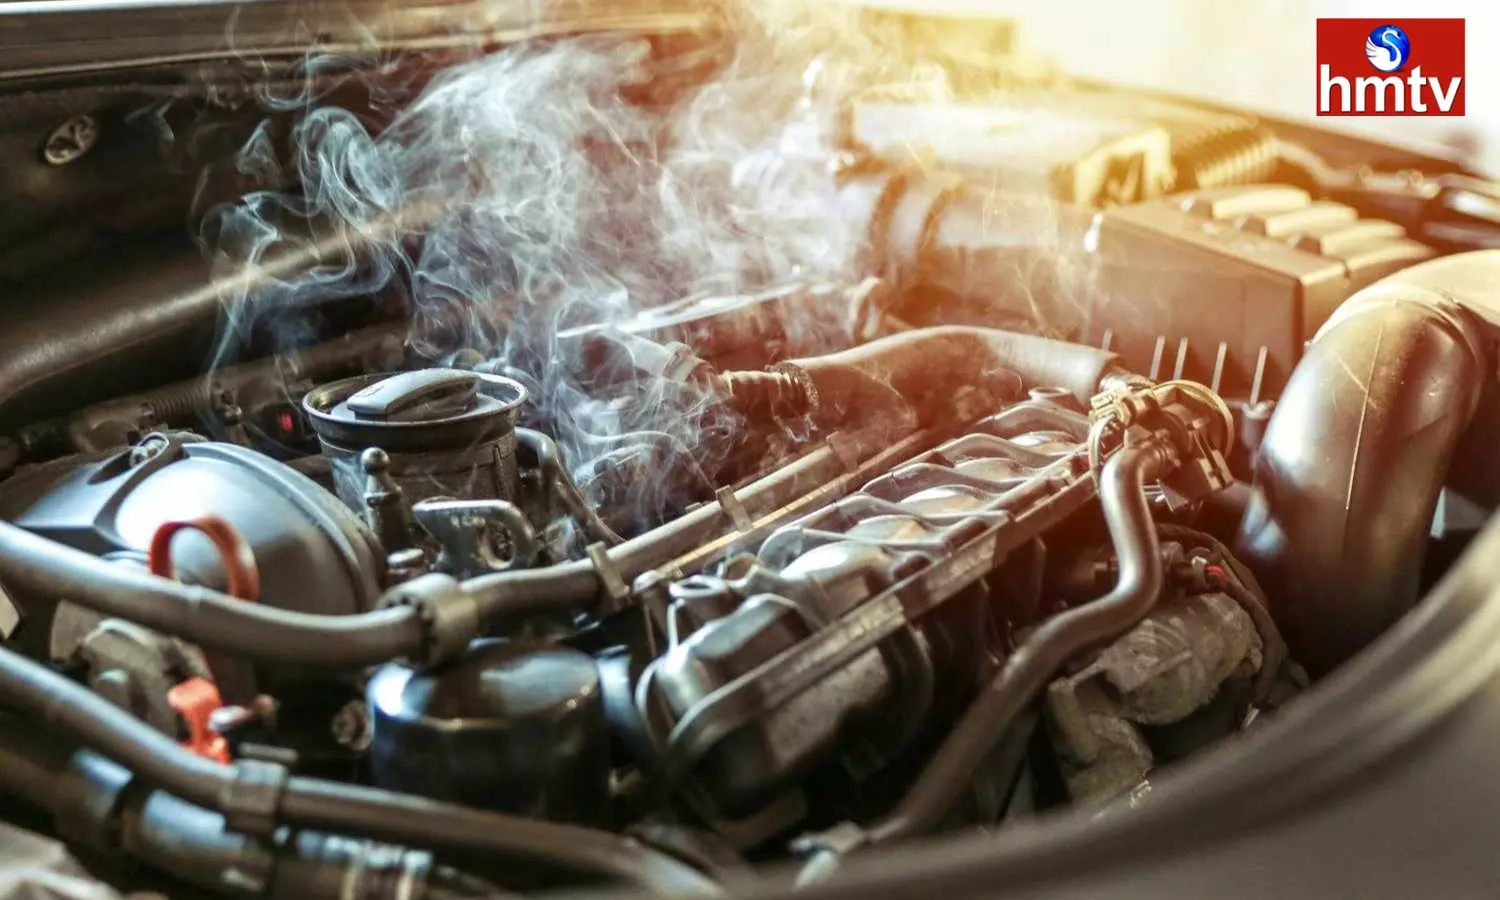 Does the car engine overheat often know these things